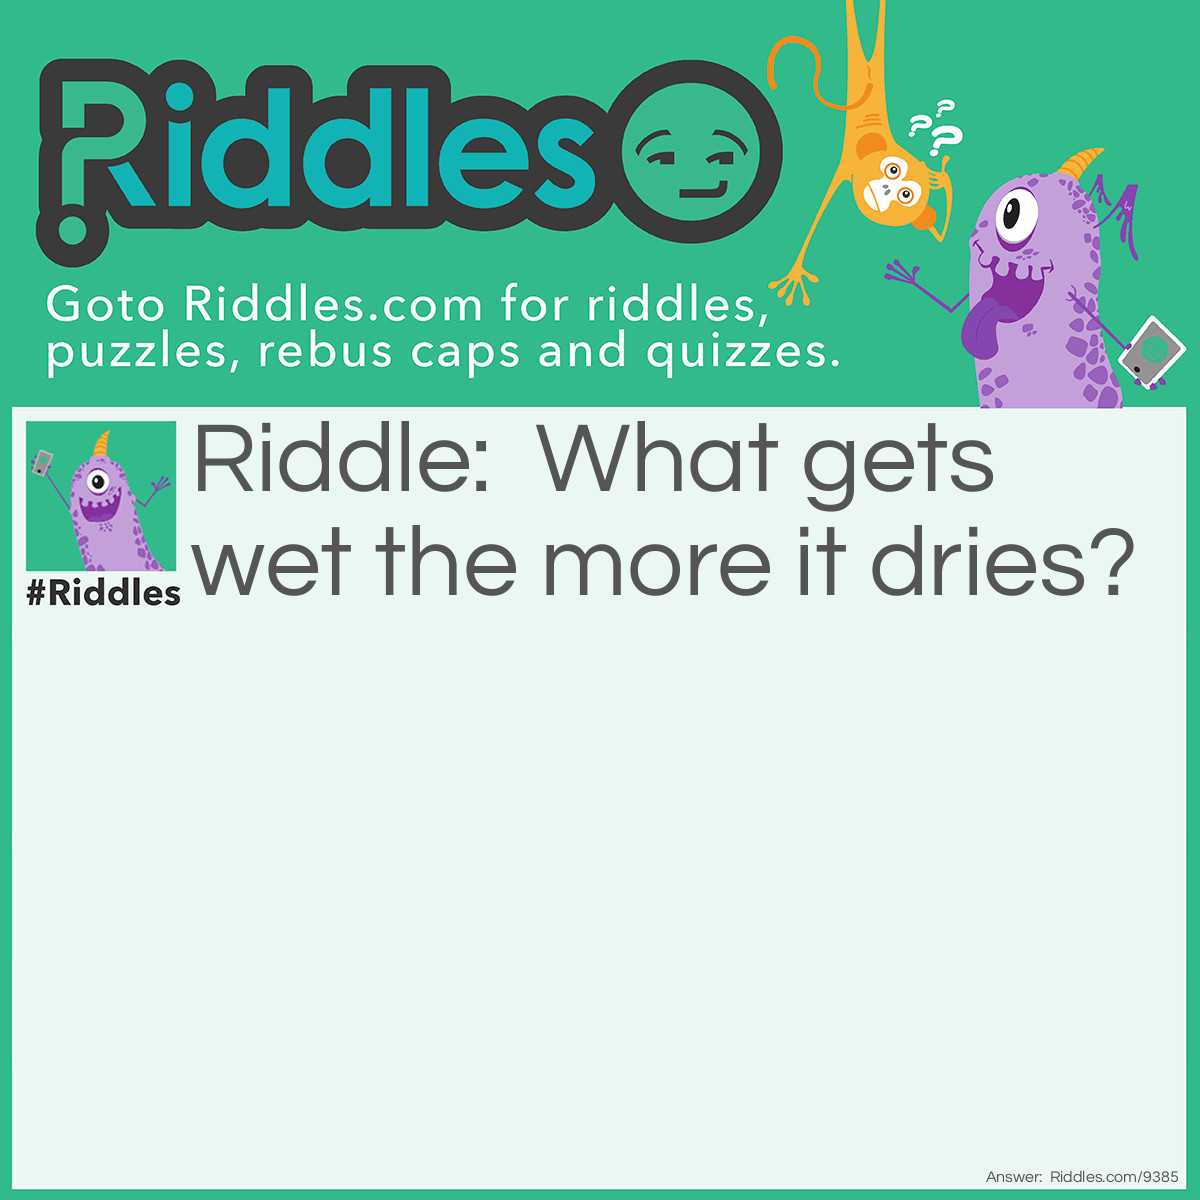 Riddle: What gets wet the more it dries? Answer: A towel.